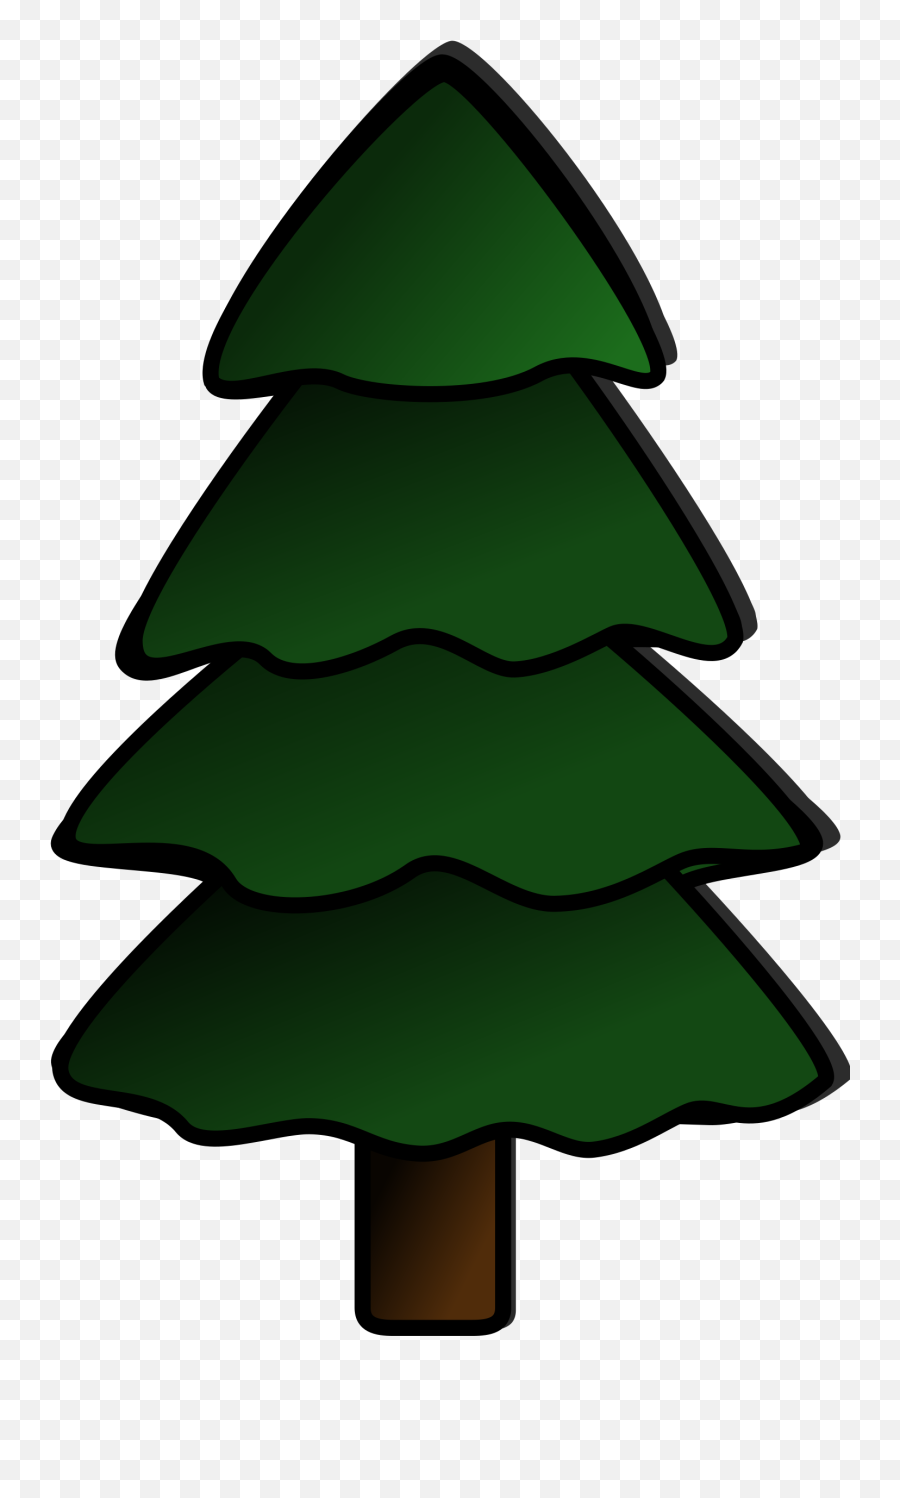 Free Evergreen Tree Outline Download Free Clip Art Free - Clip Art Pine Tree Emoji,Pine Tree Emoji